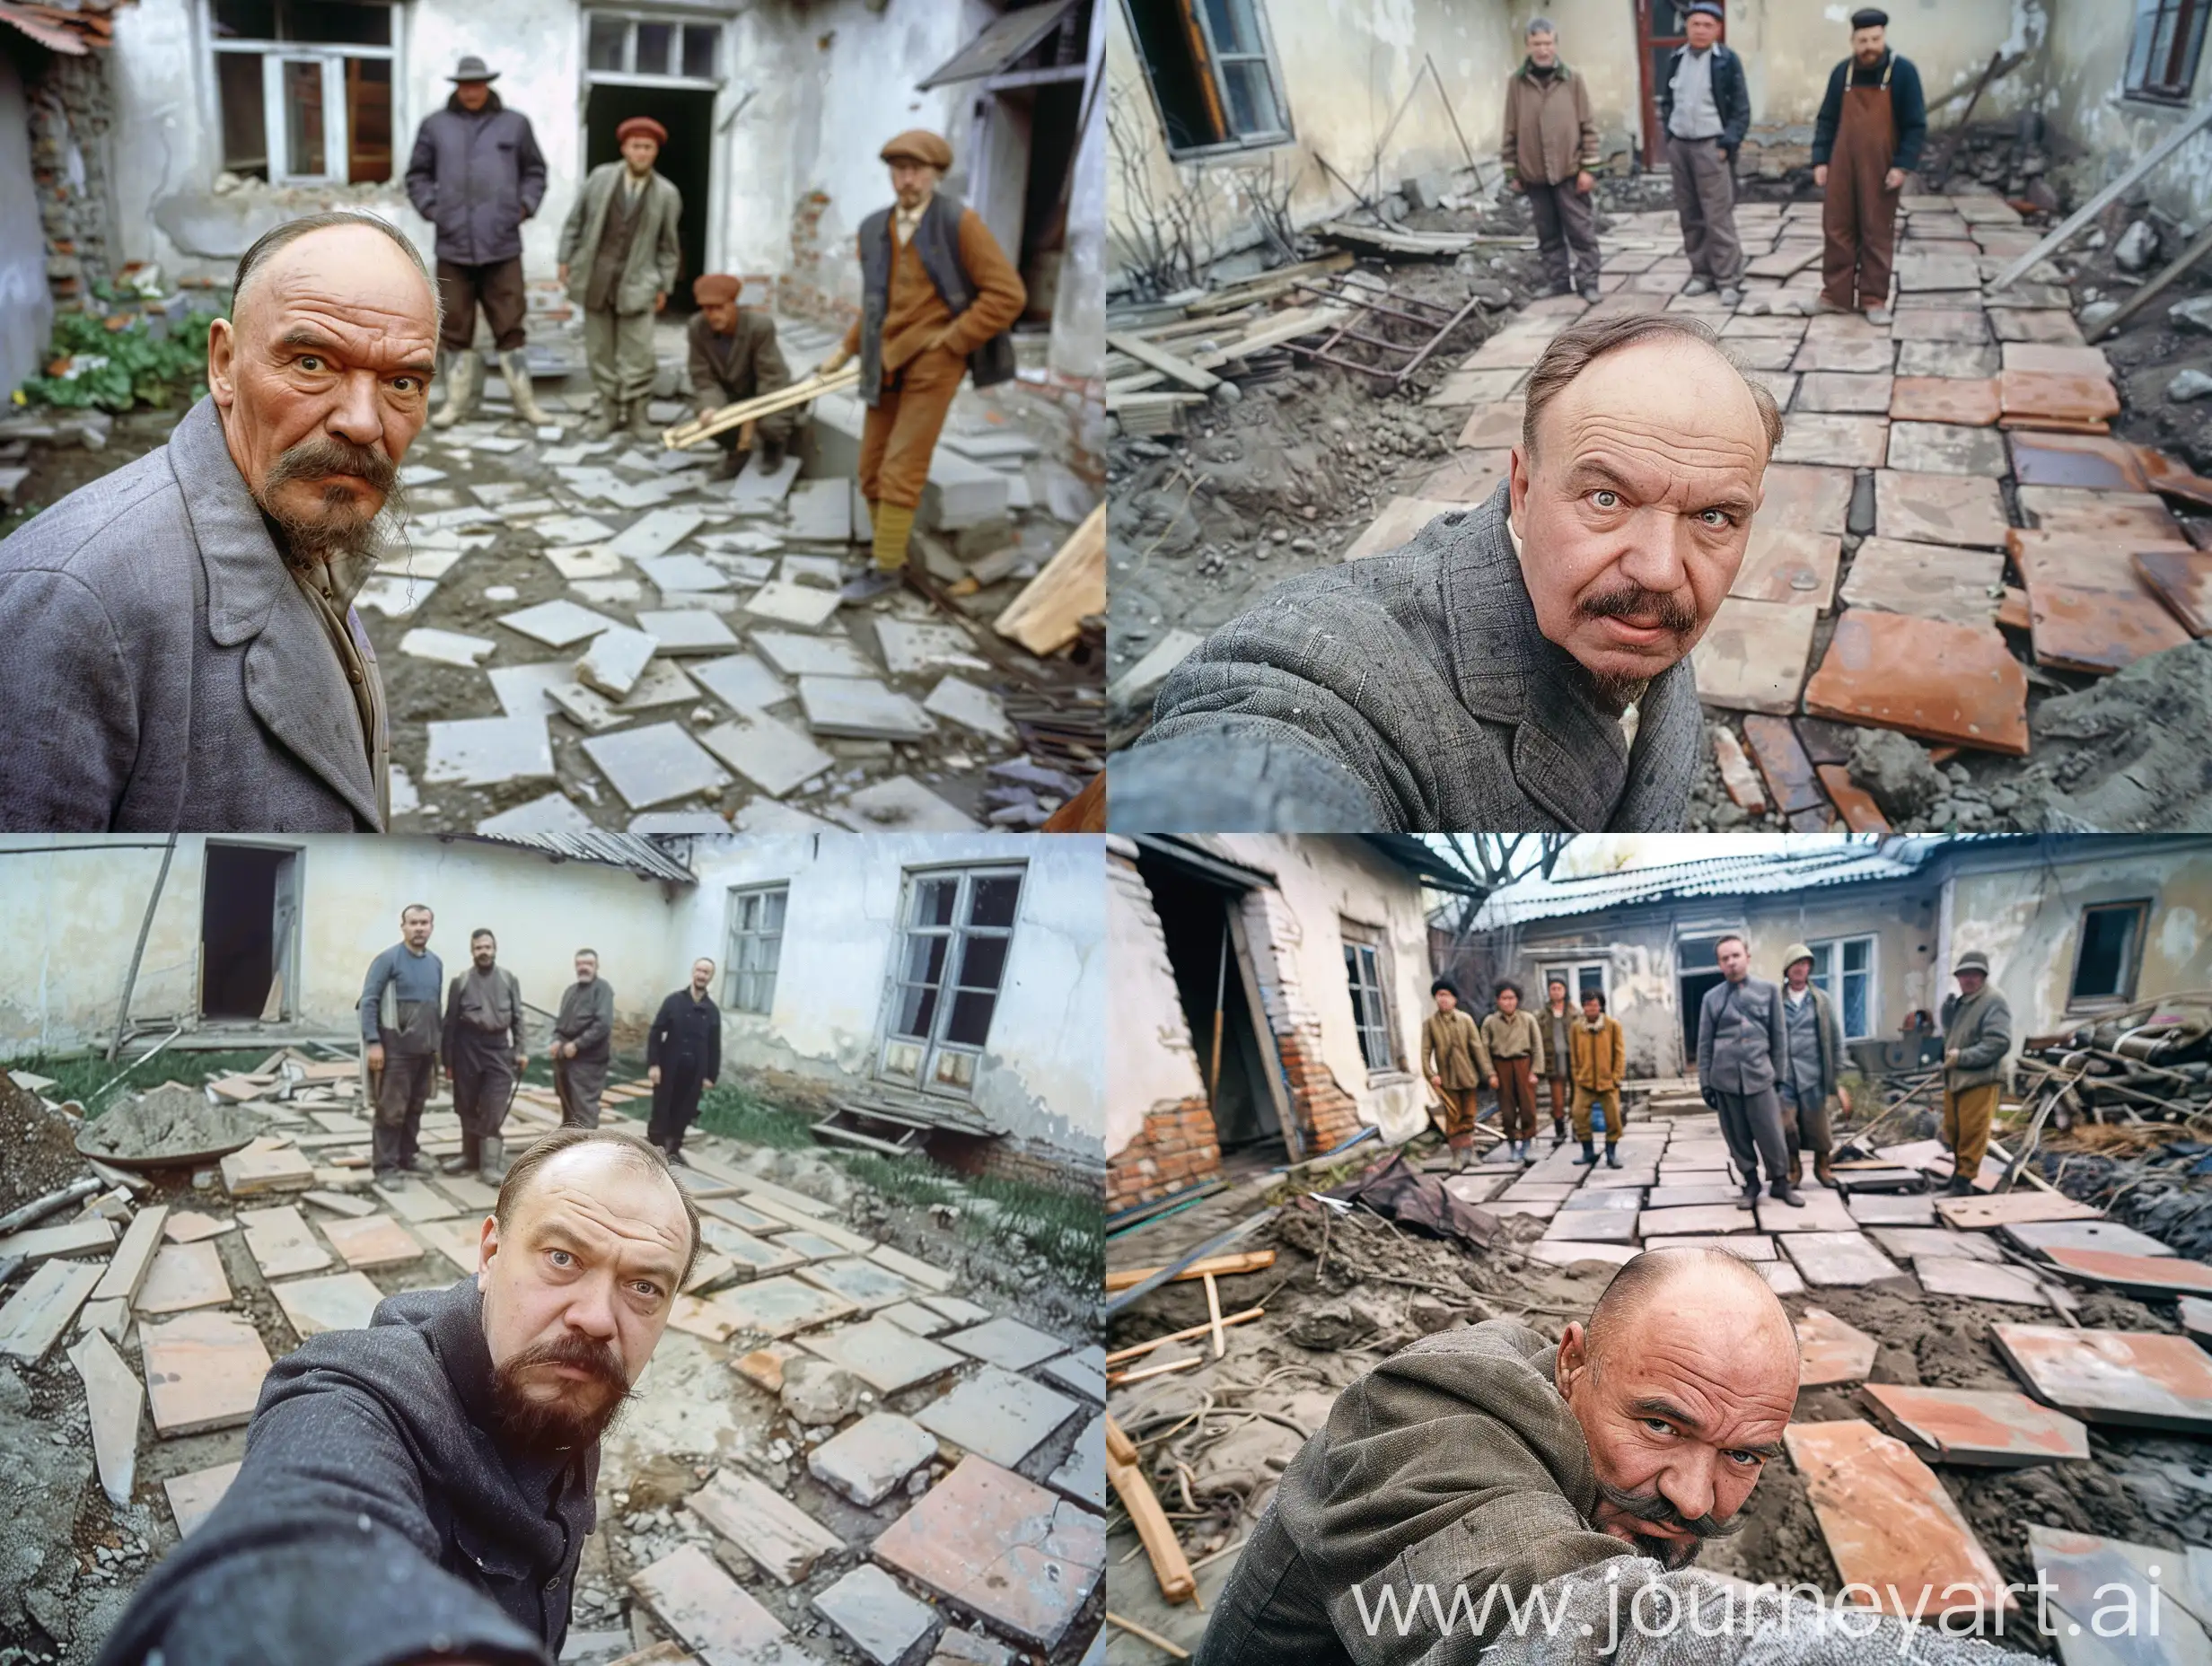 Vladimir-Lenin-Inspecting-Poorly-Laid-Paving-Slabs-with-Guilty-Workers-Candid-Photo-Report